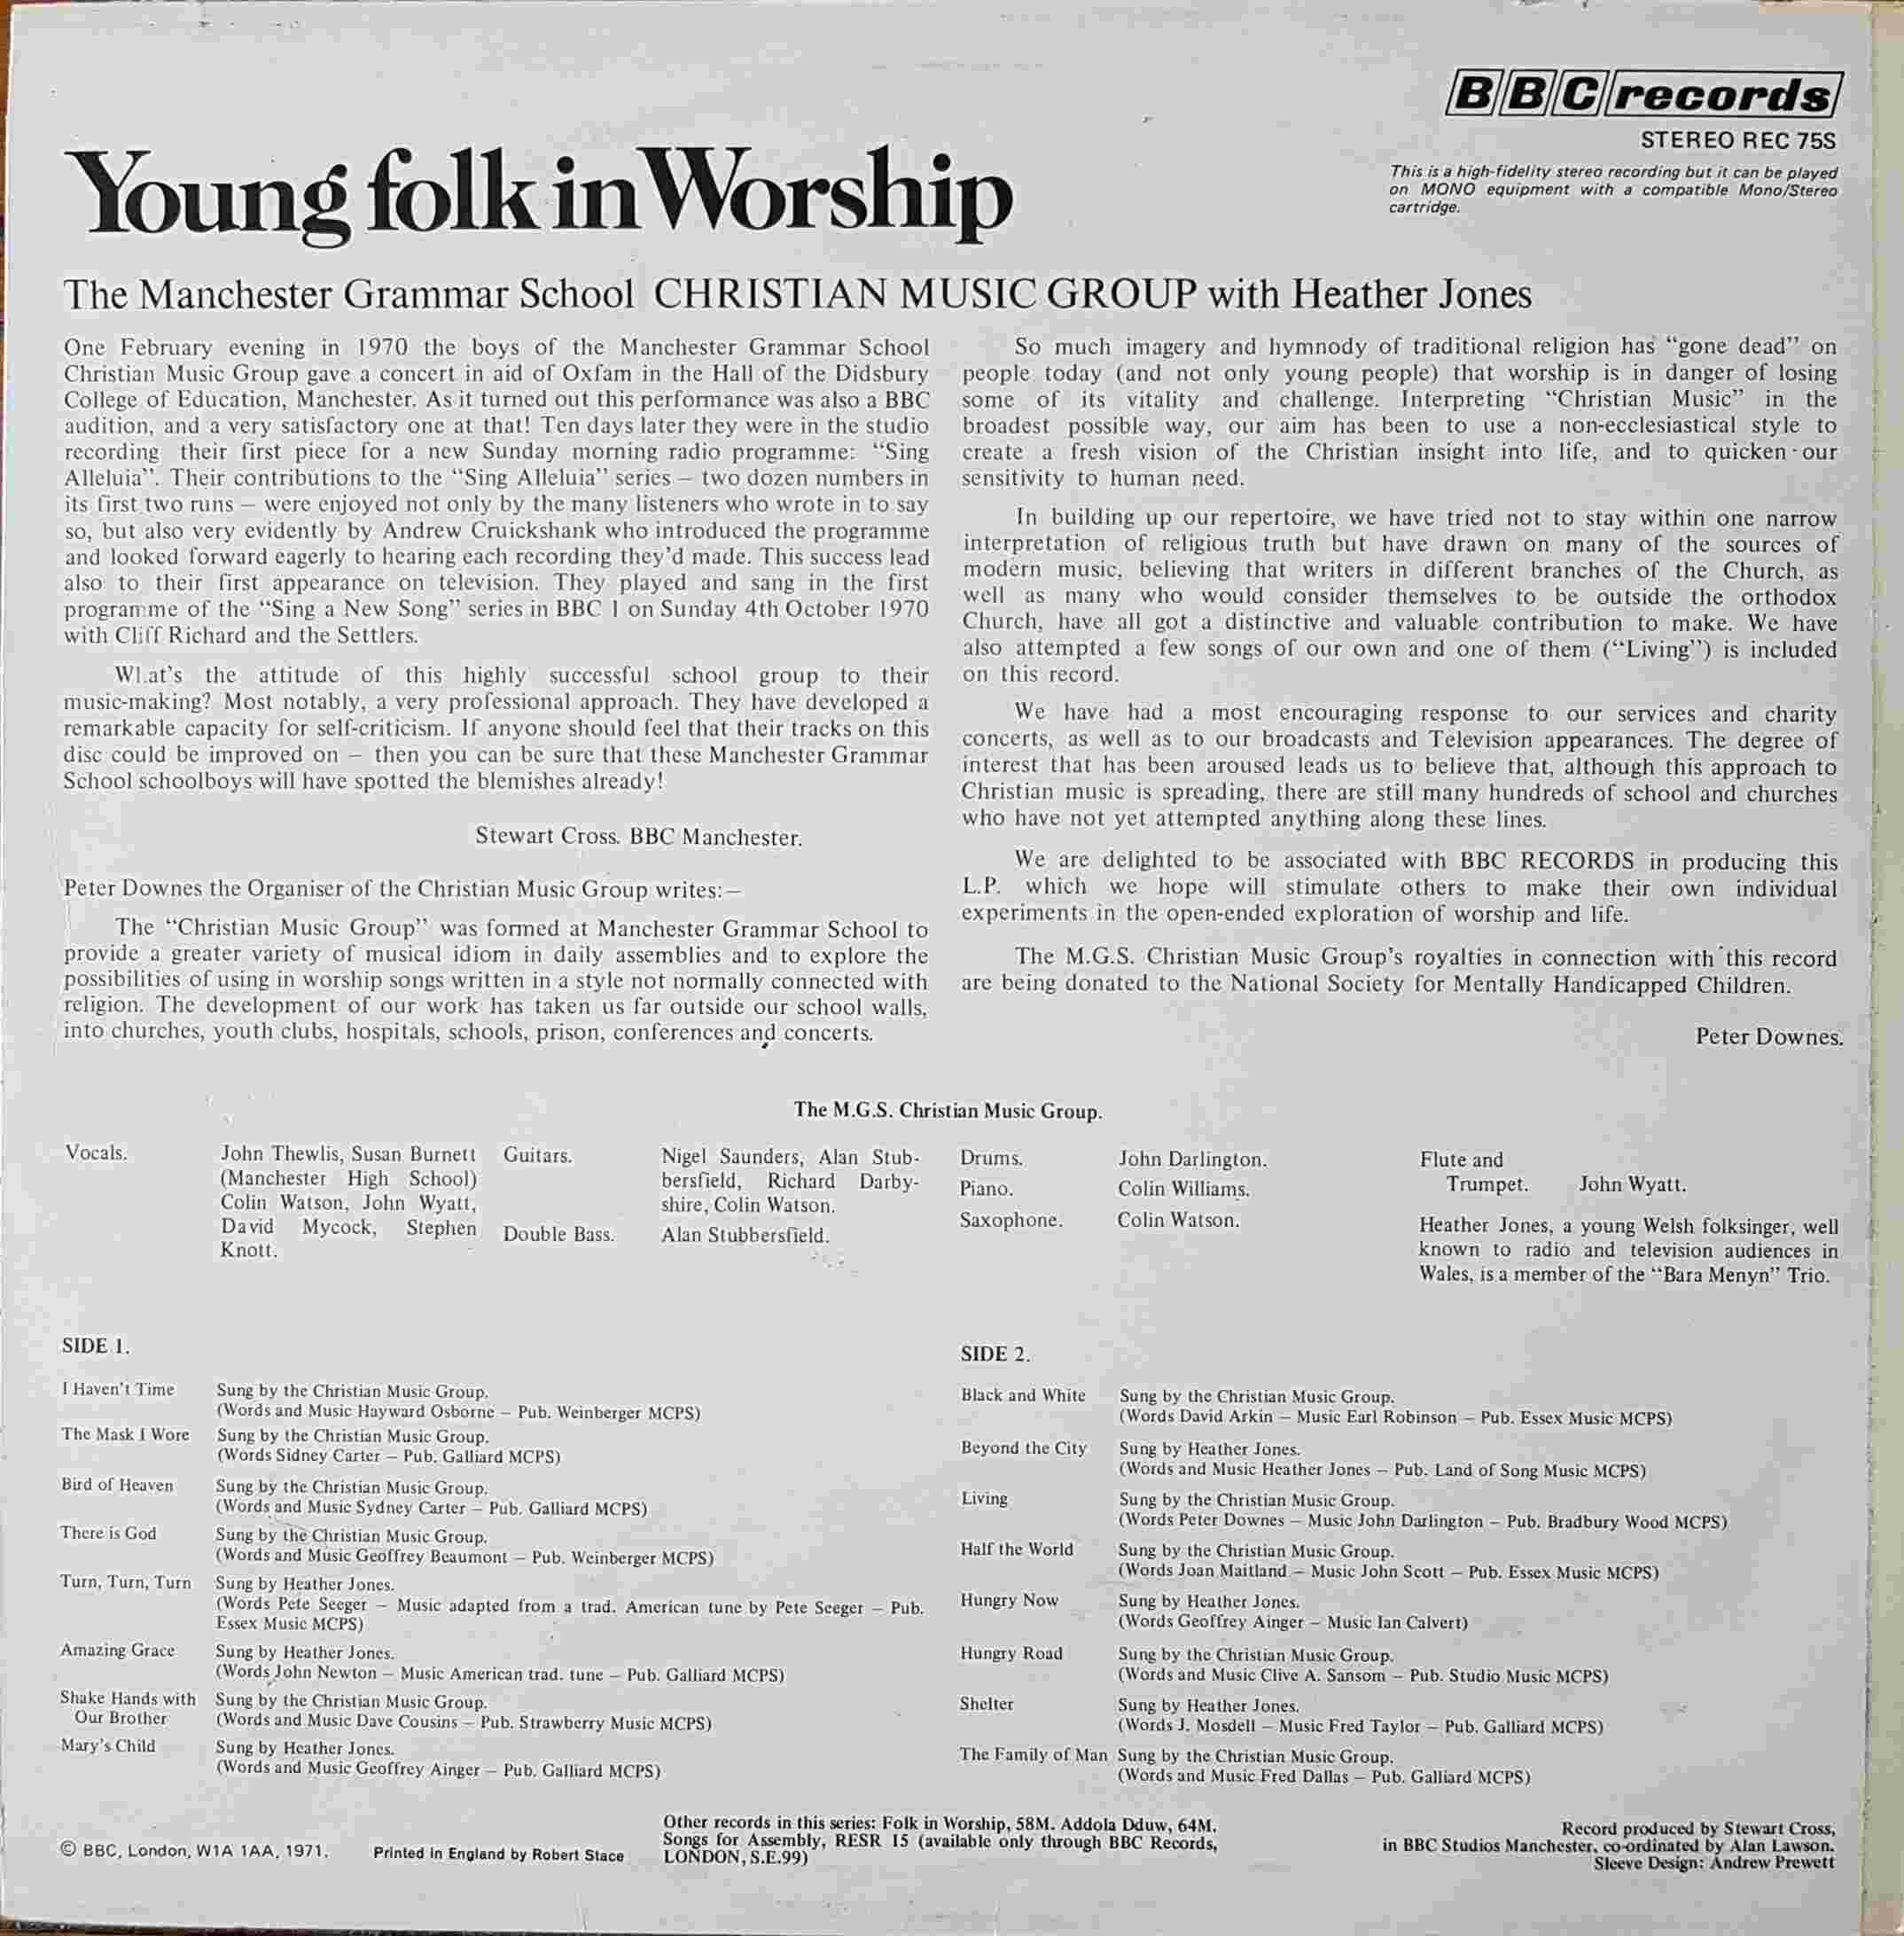 Picture of REC 75 Young folk in Worship by artist Various from the BBC records and Tapes library